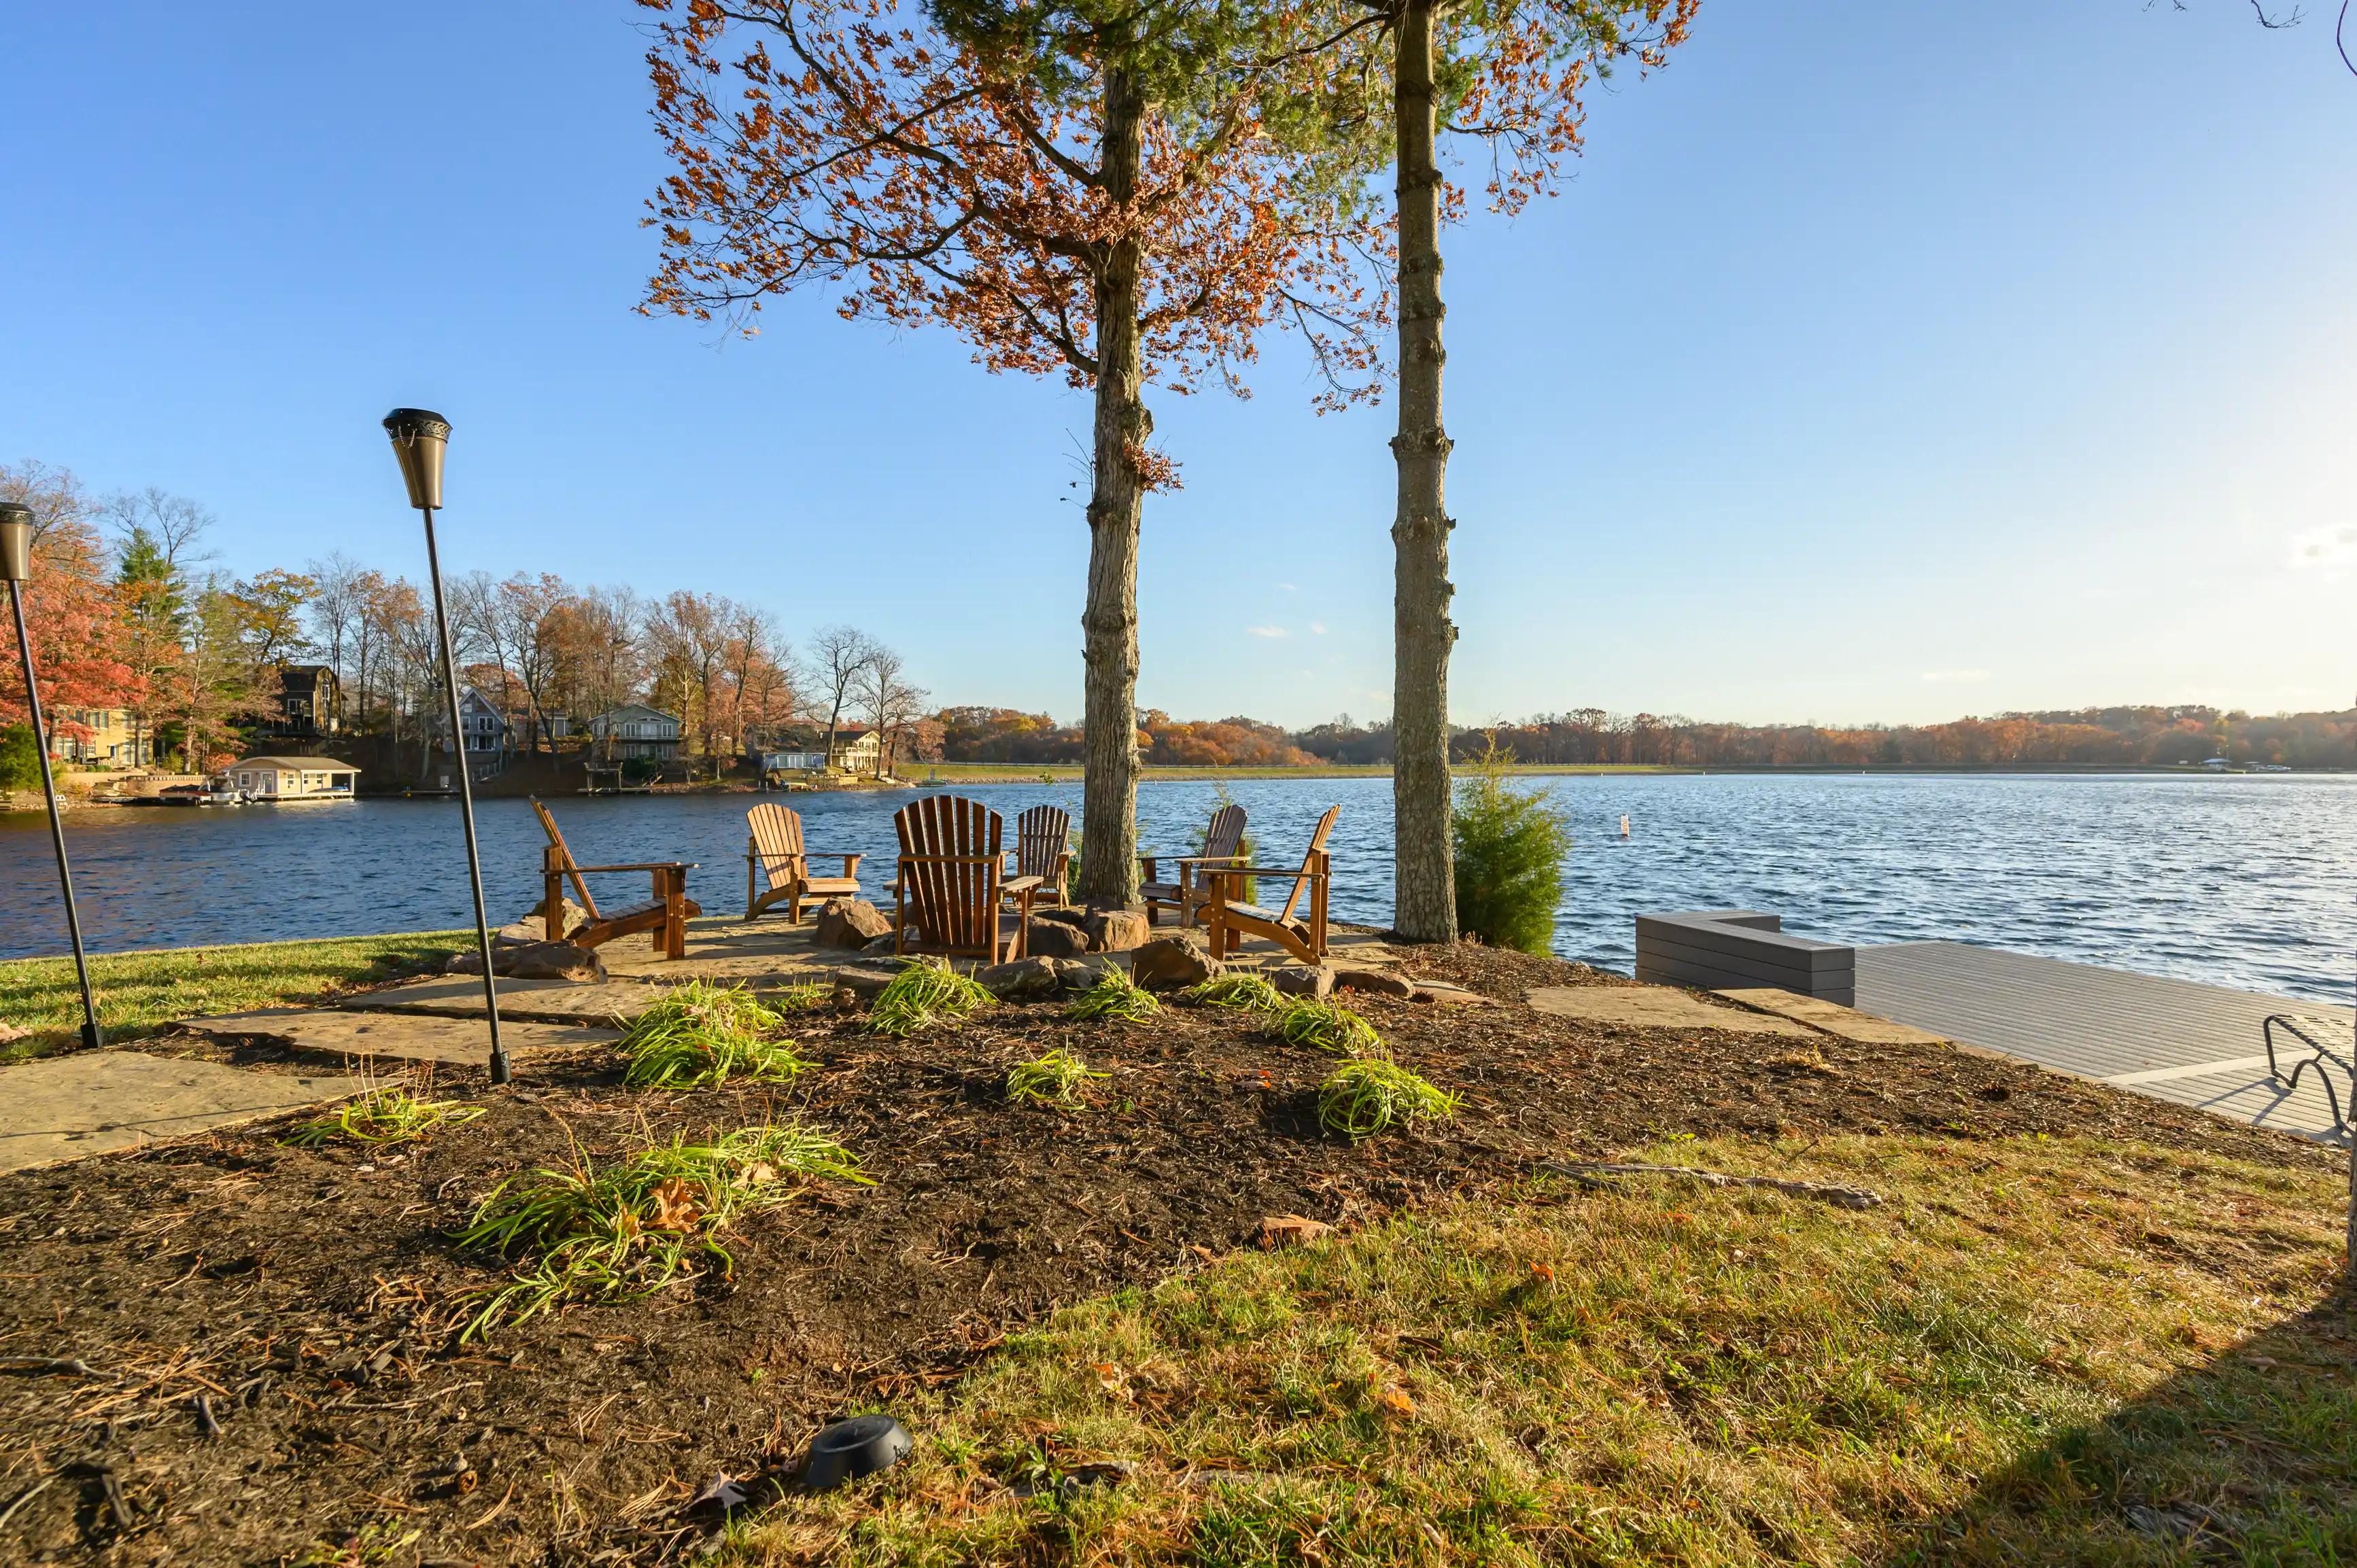 Scenic view of a lakeside with Adirondack chairs on the shore, trees with autumn leaves, and houses across the water under a clear blue sky.